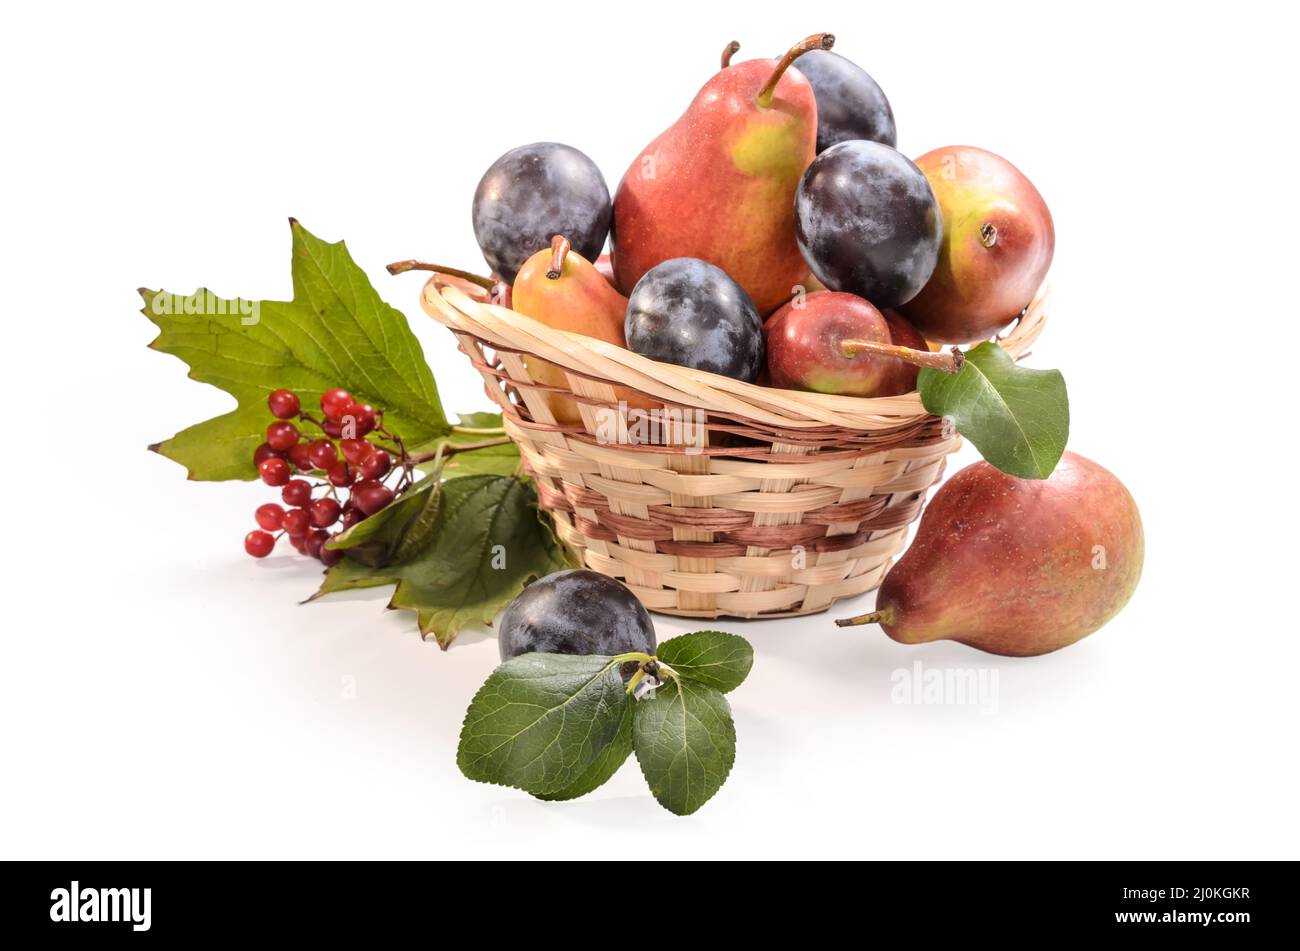 Fruits and berries in a basket on a white background with soft shadow Stock Photo